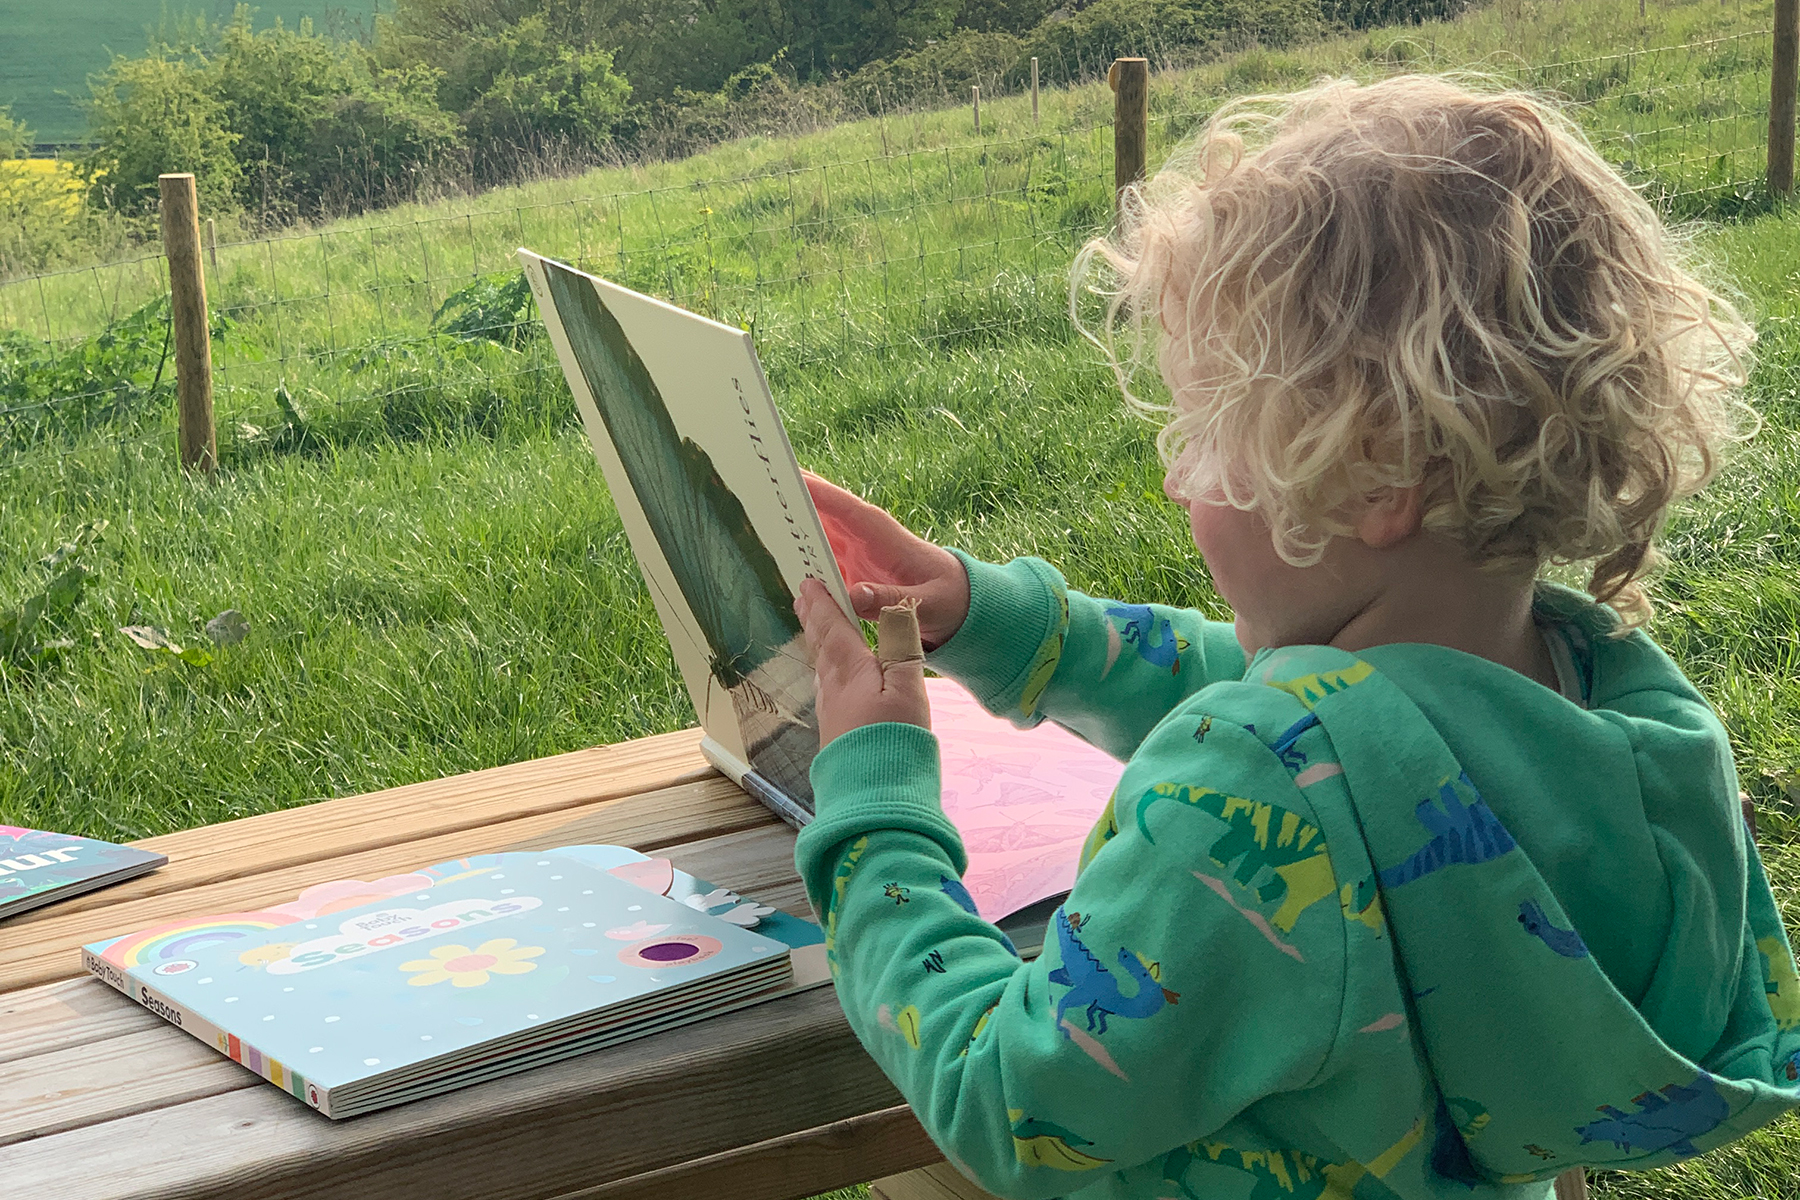 A photo of a young blonde haired child reading a Ladybird book against a beautiful field background